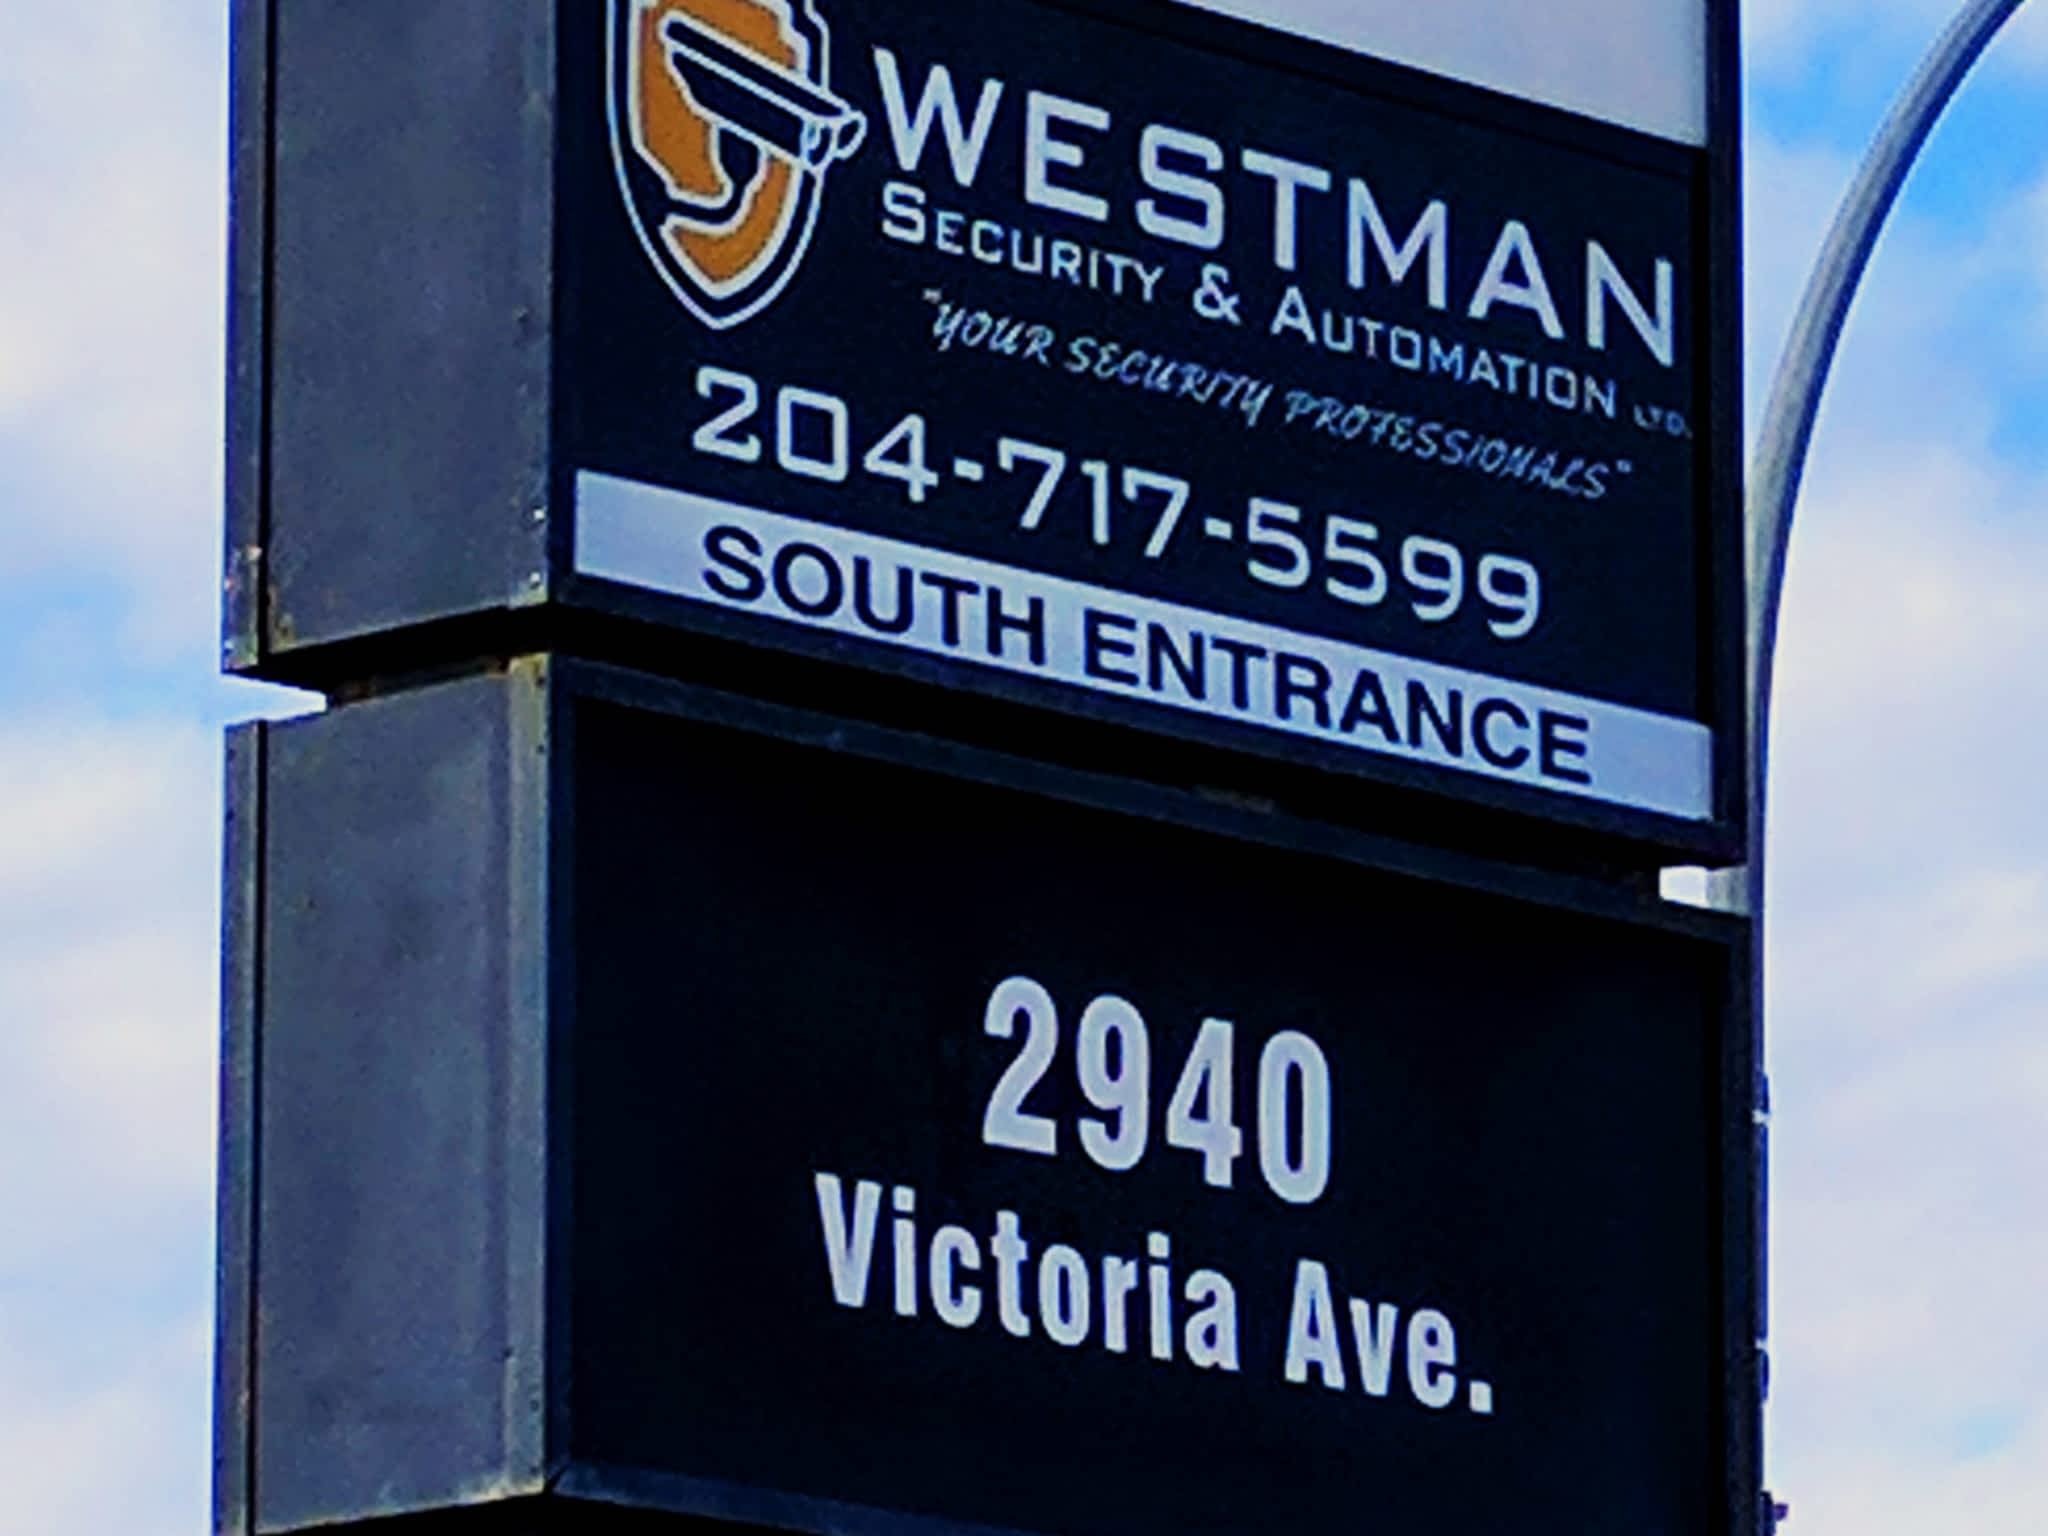 photo Westman Security & Automation